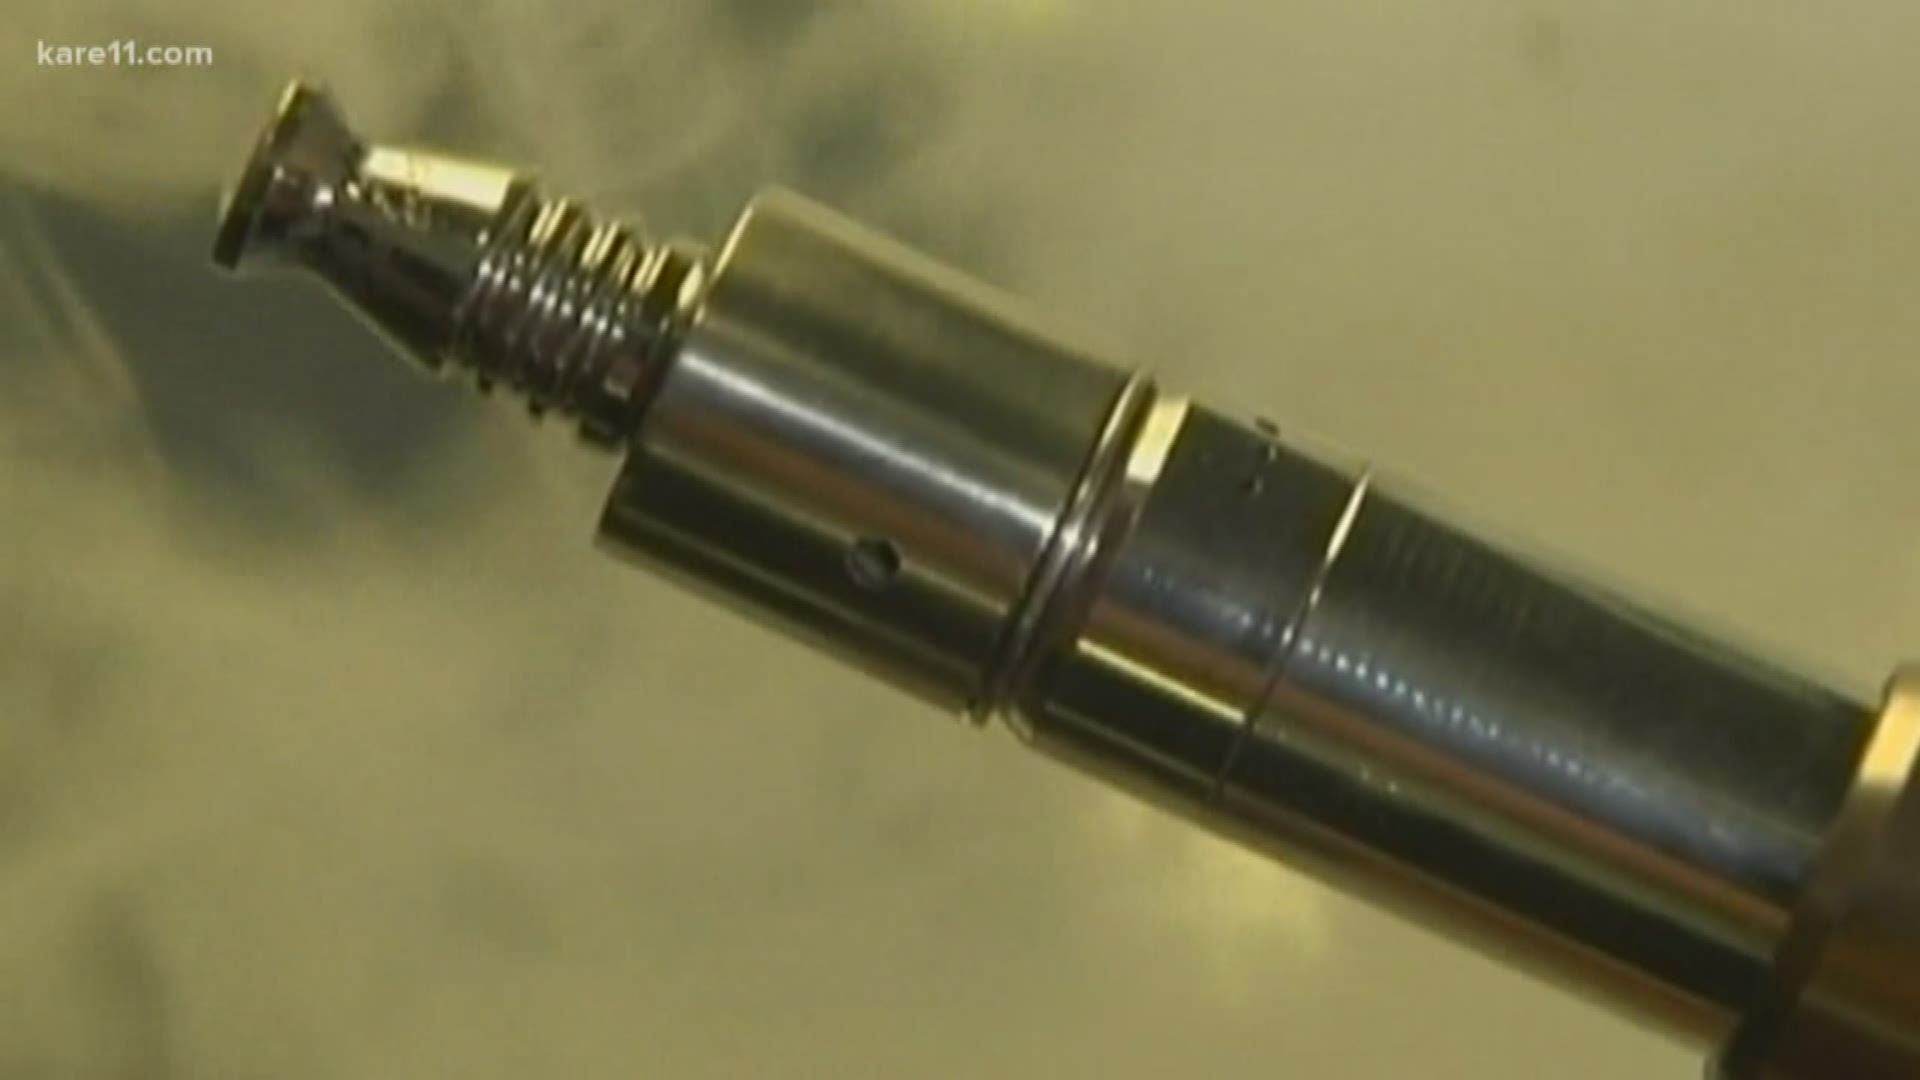 This is the first year that many Minnesota law enforcement agencies accepted vaping devices.